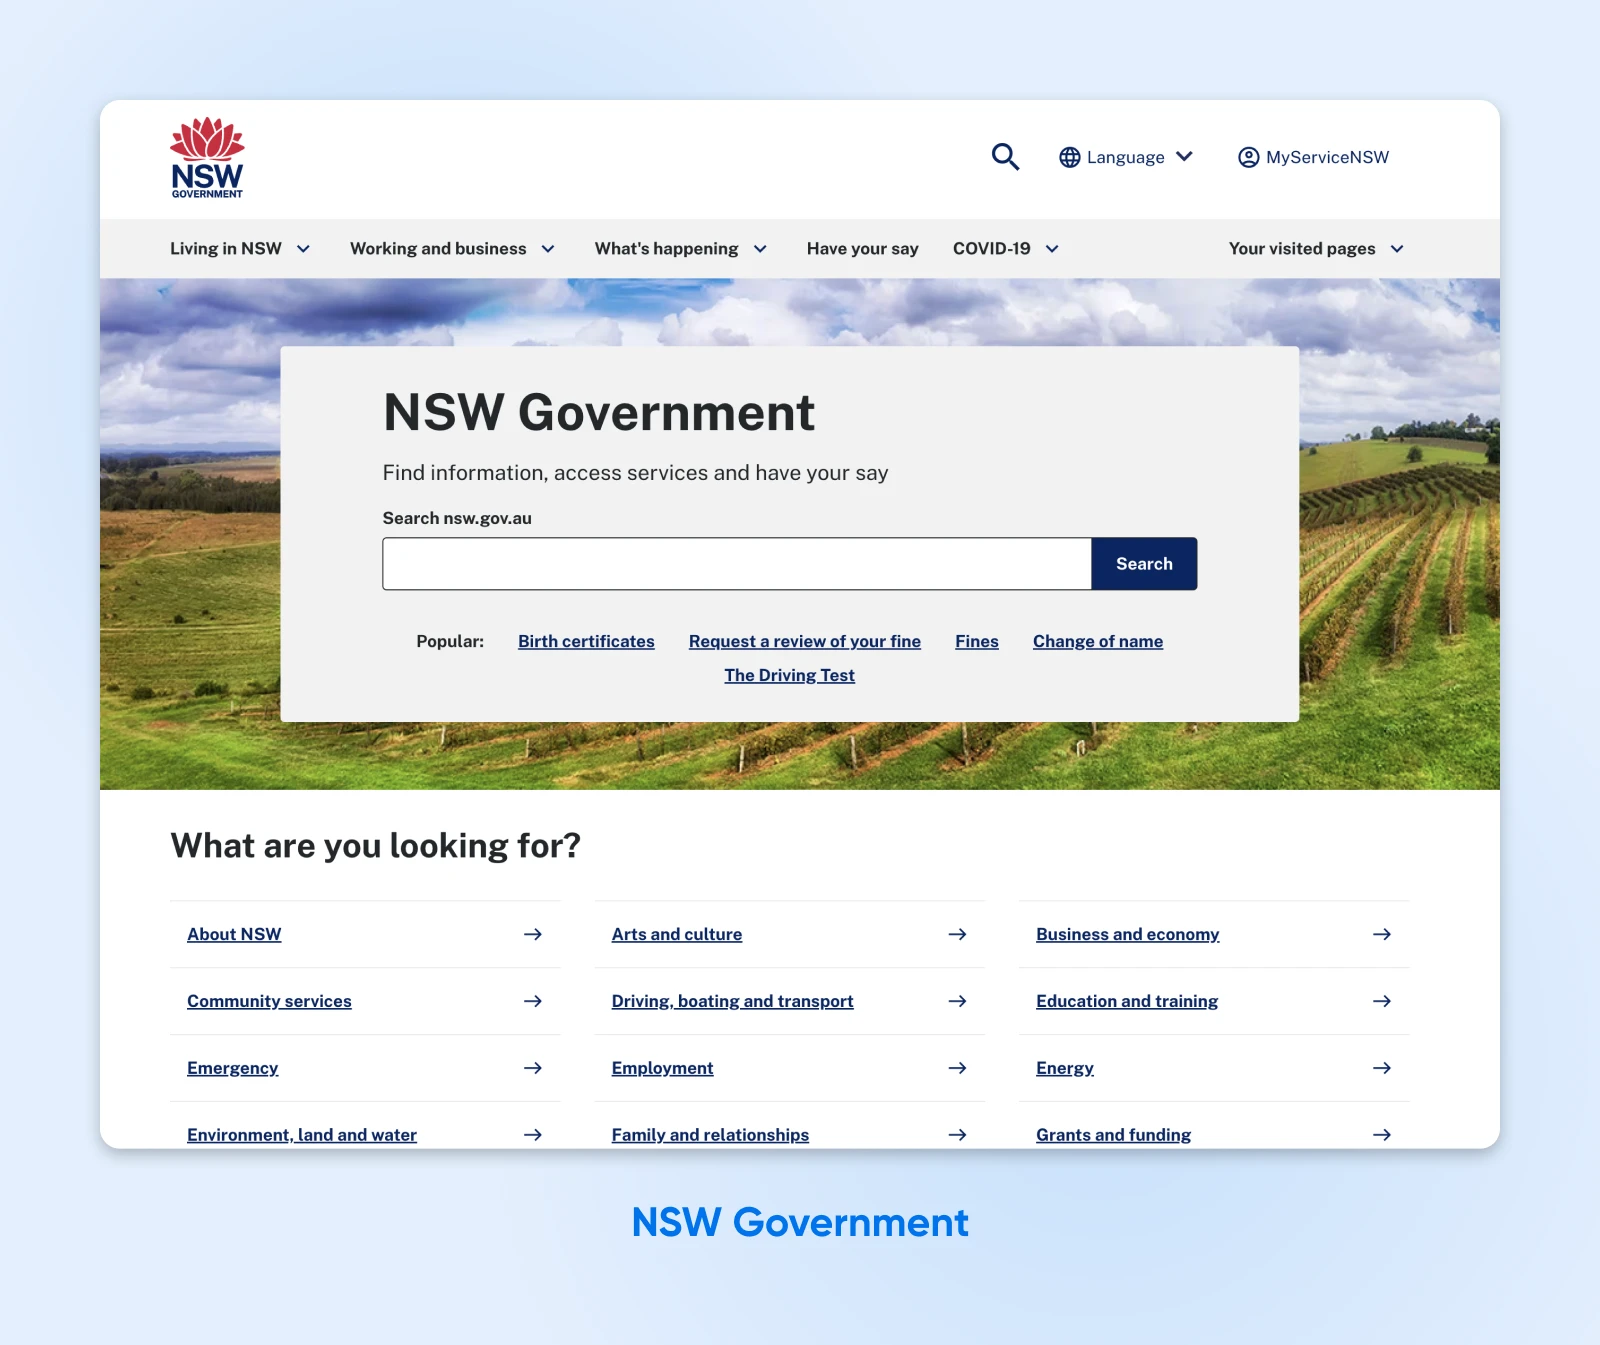 NSW Government website with a search bar front and centre, and a "What are you looking for?" section below with links.